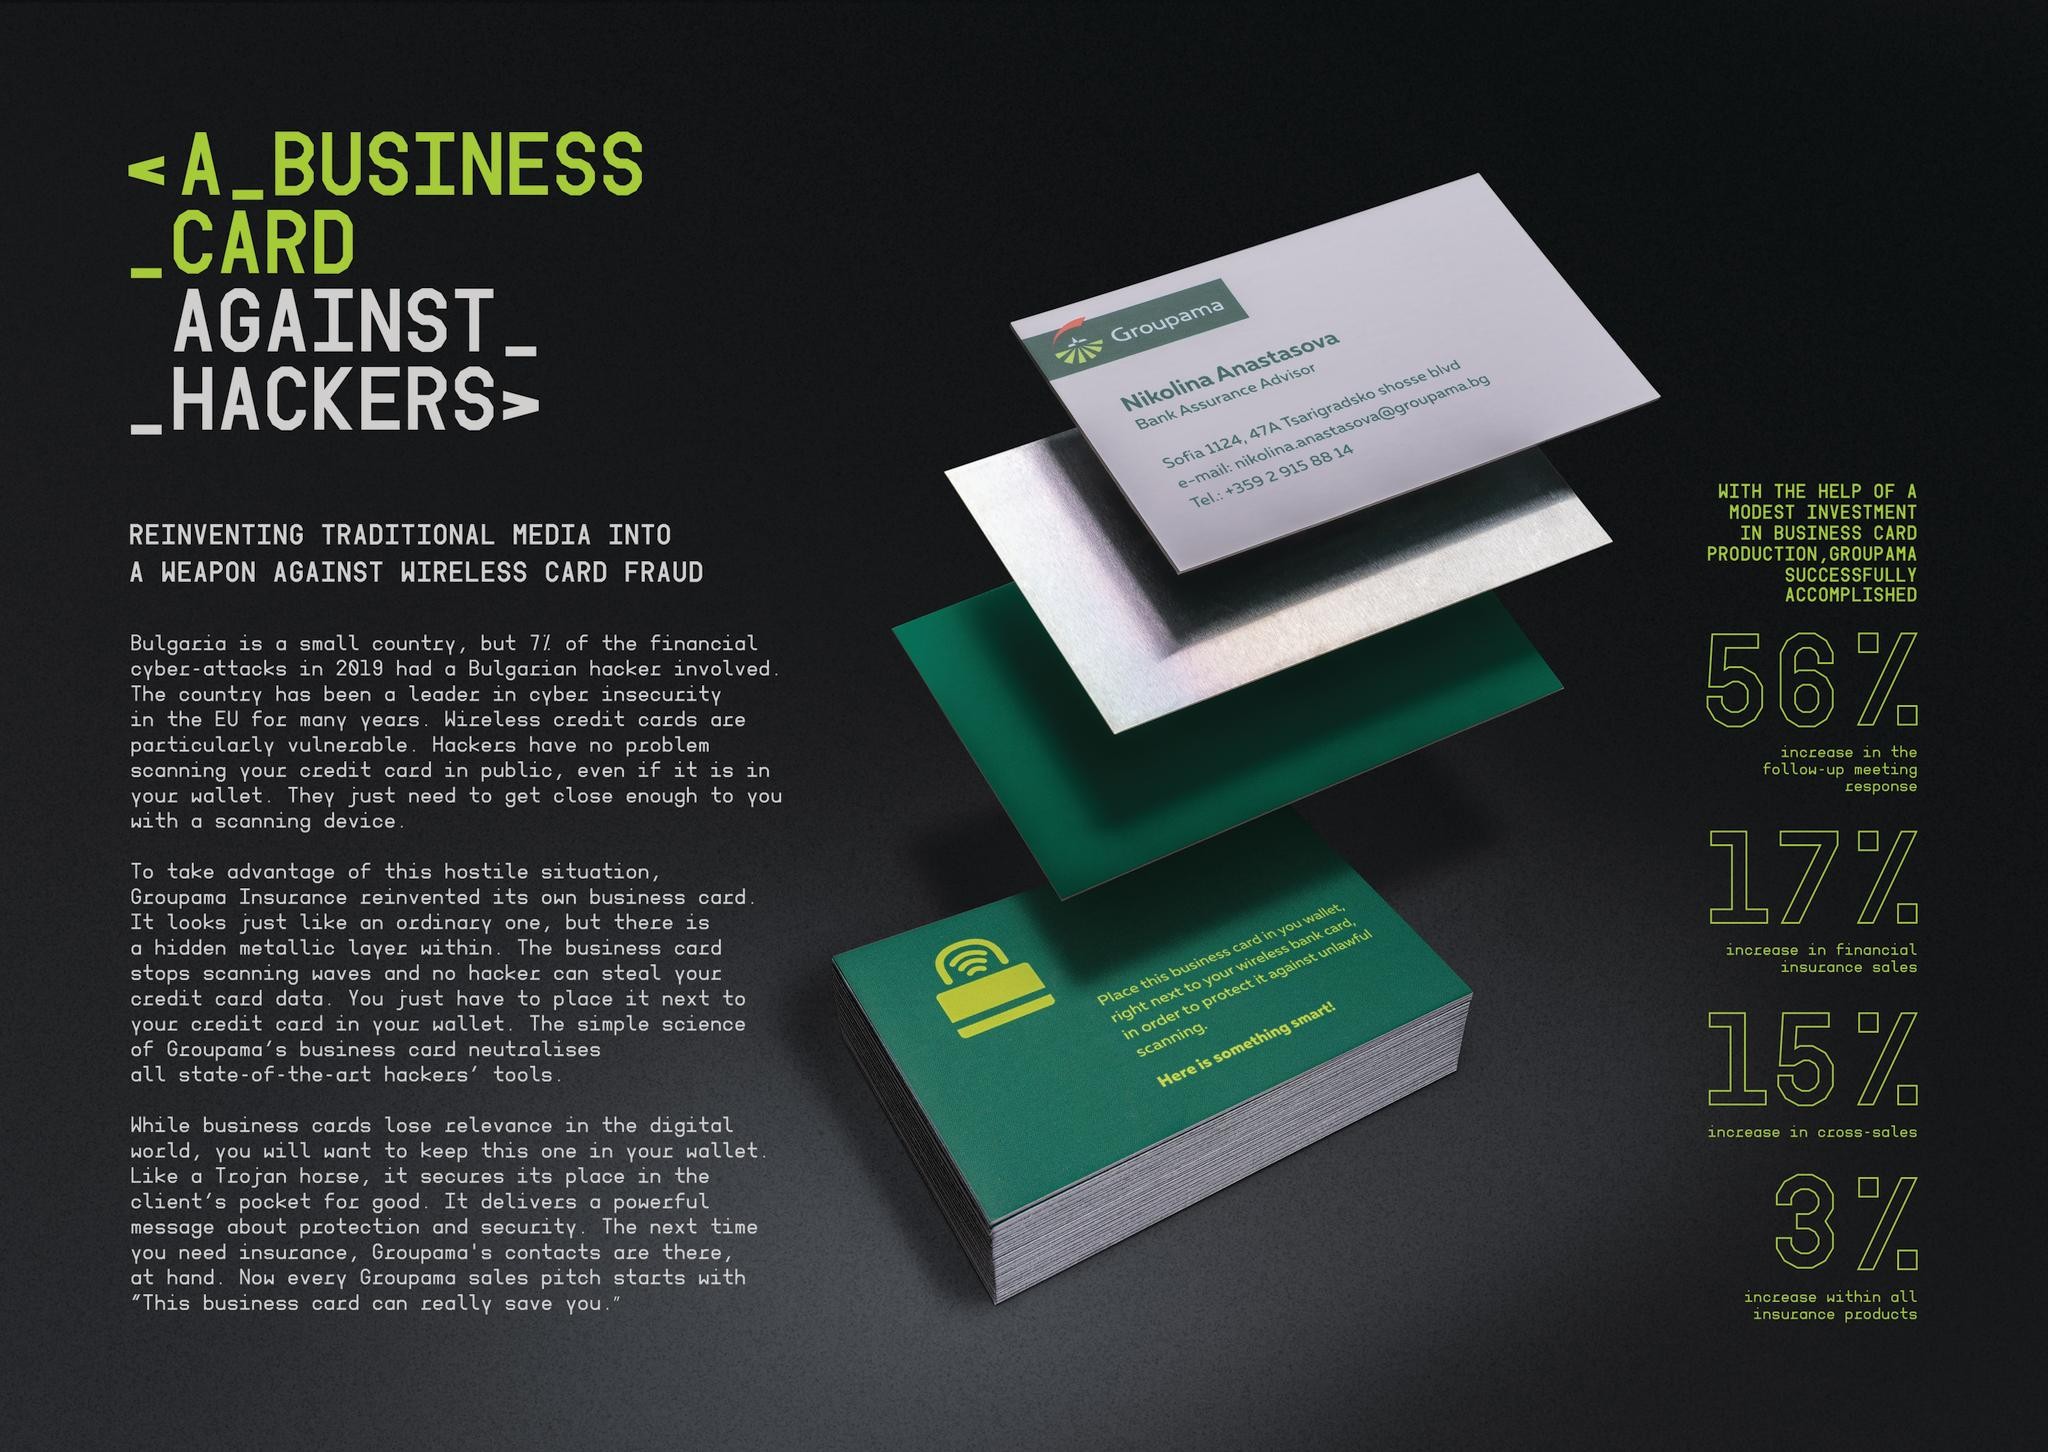 A business card against hackers